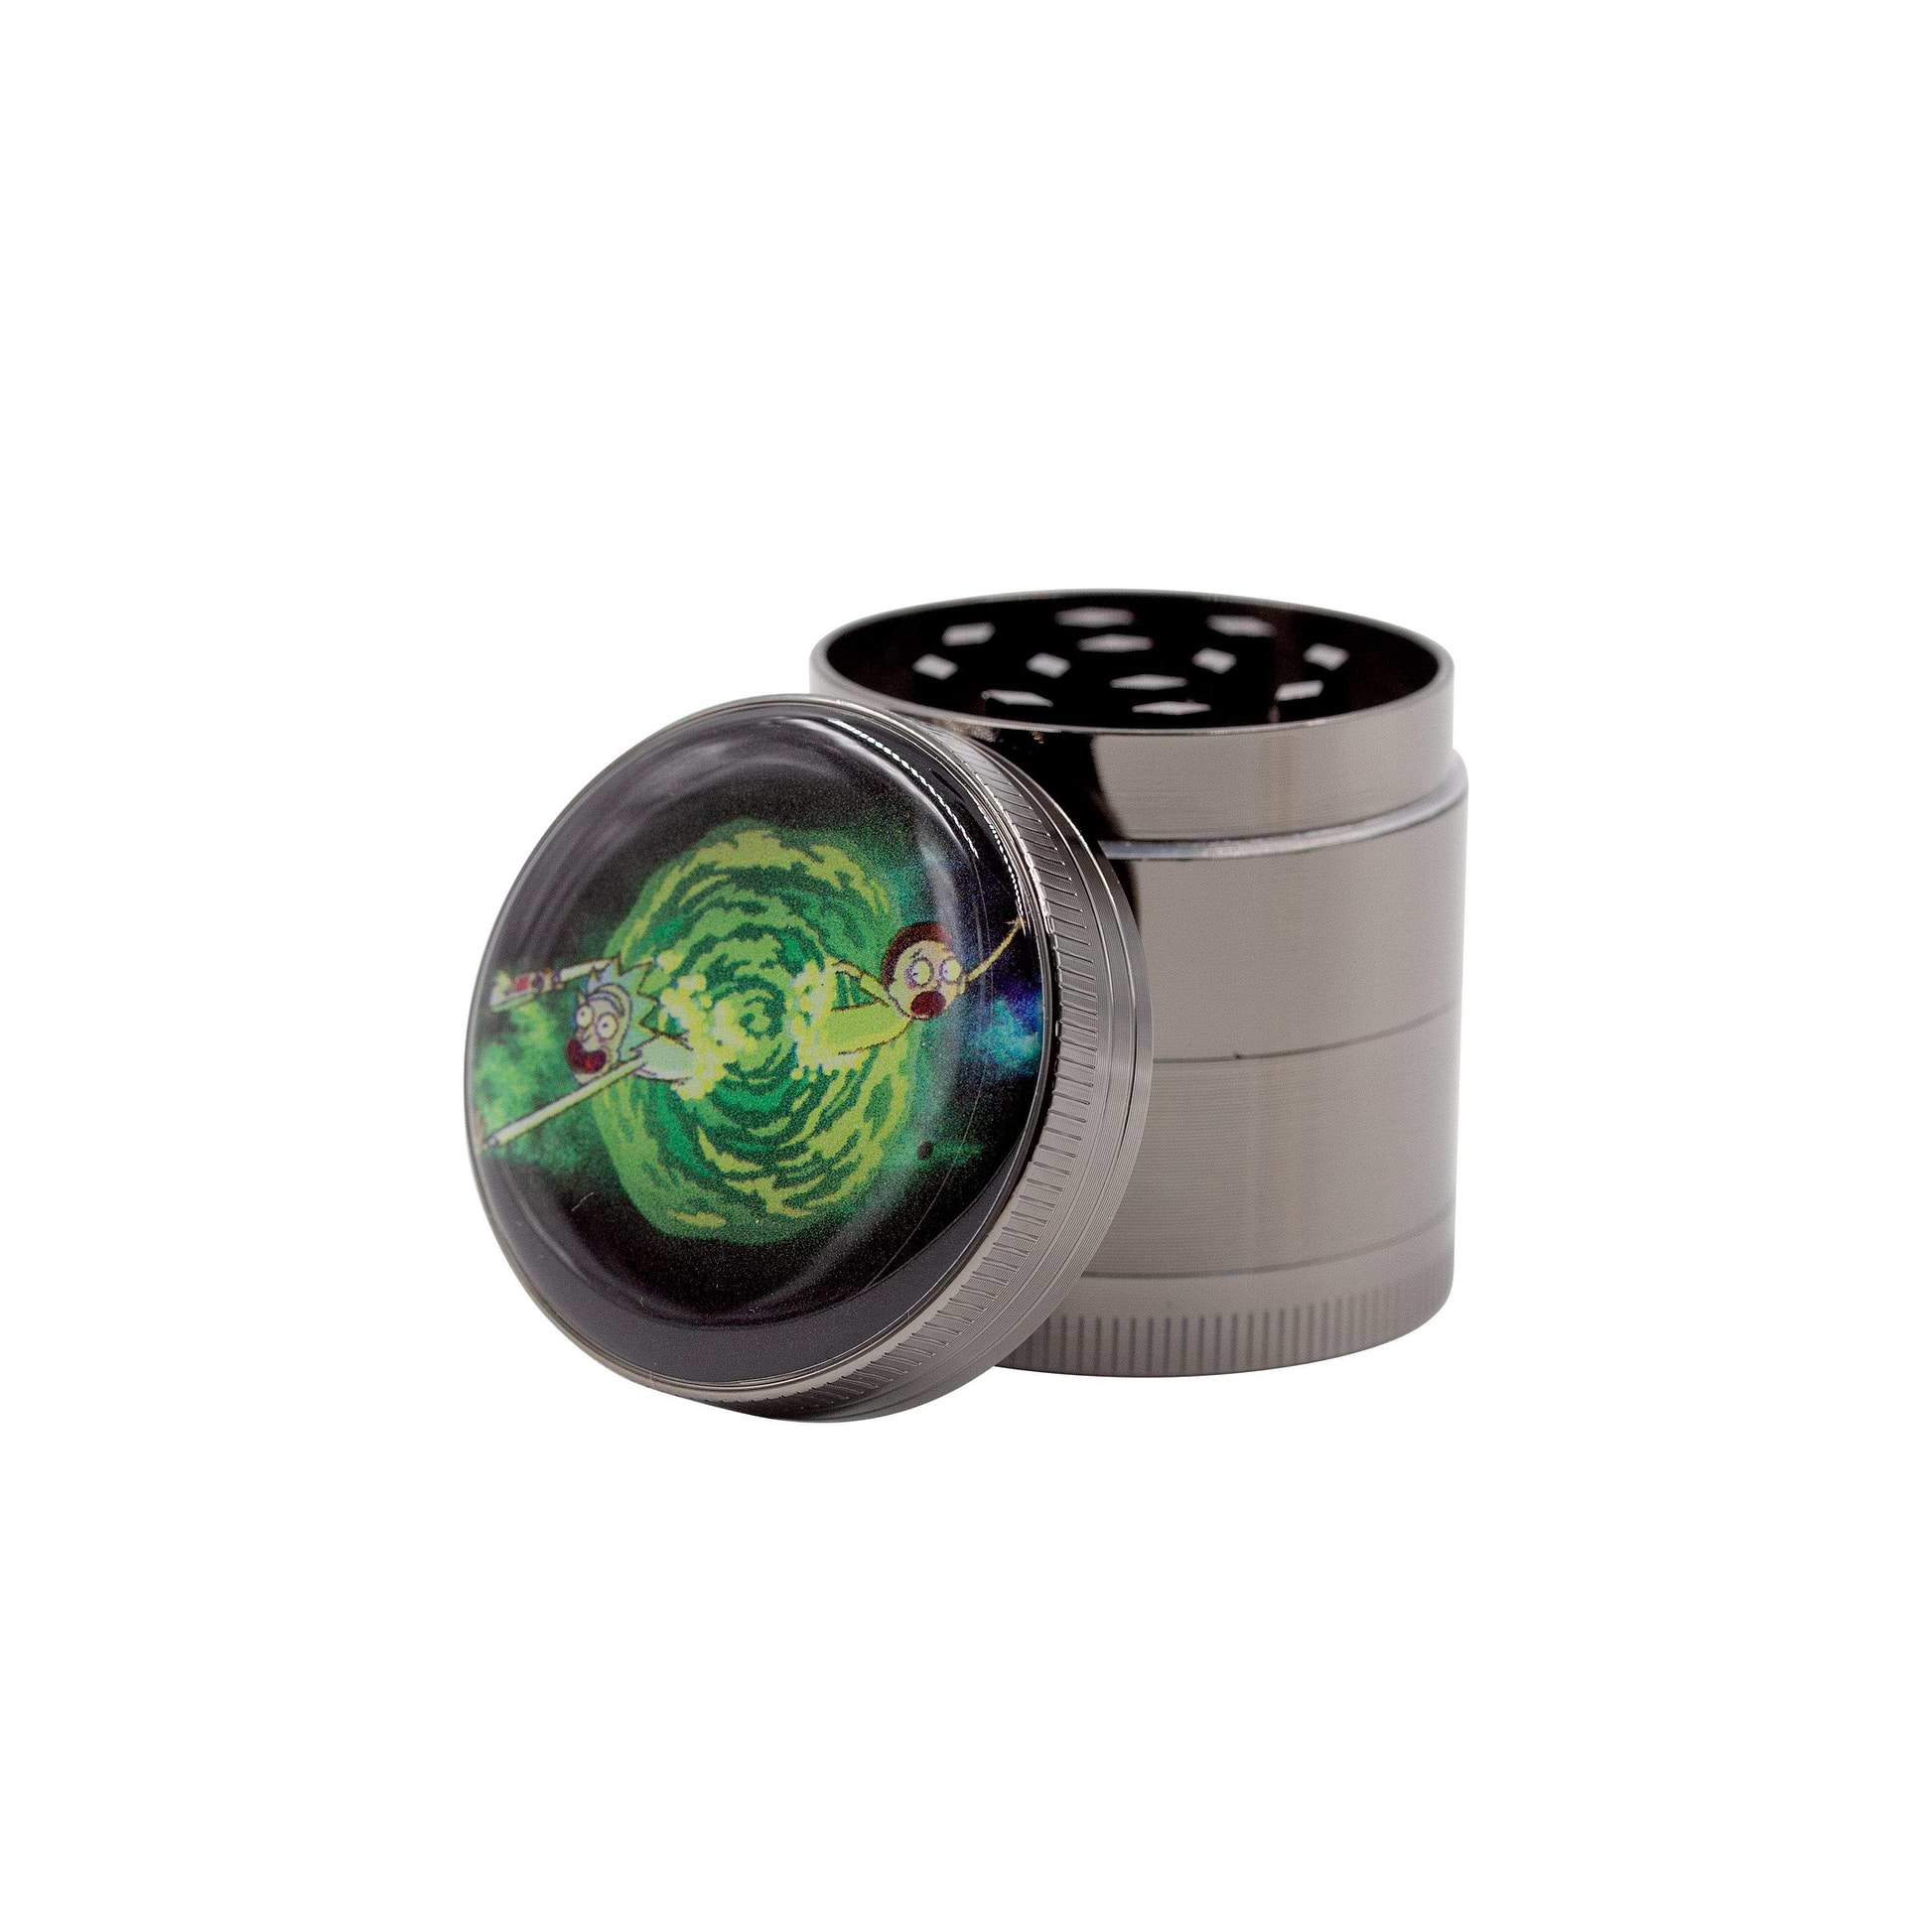 Fun set of RnM-inspired Rick and Morty designed 4-piece grinder